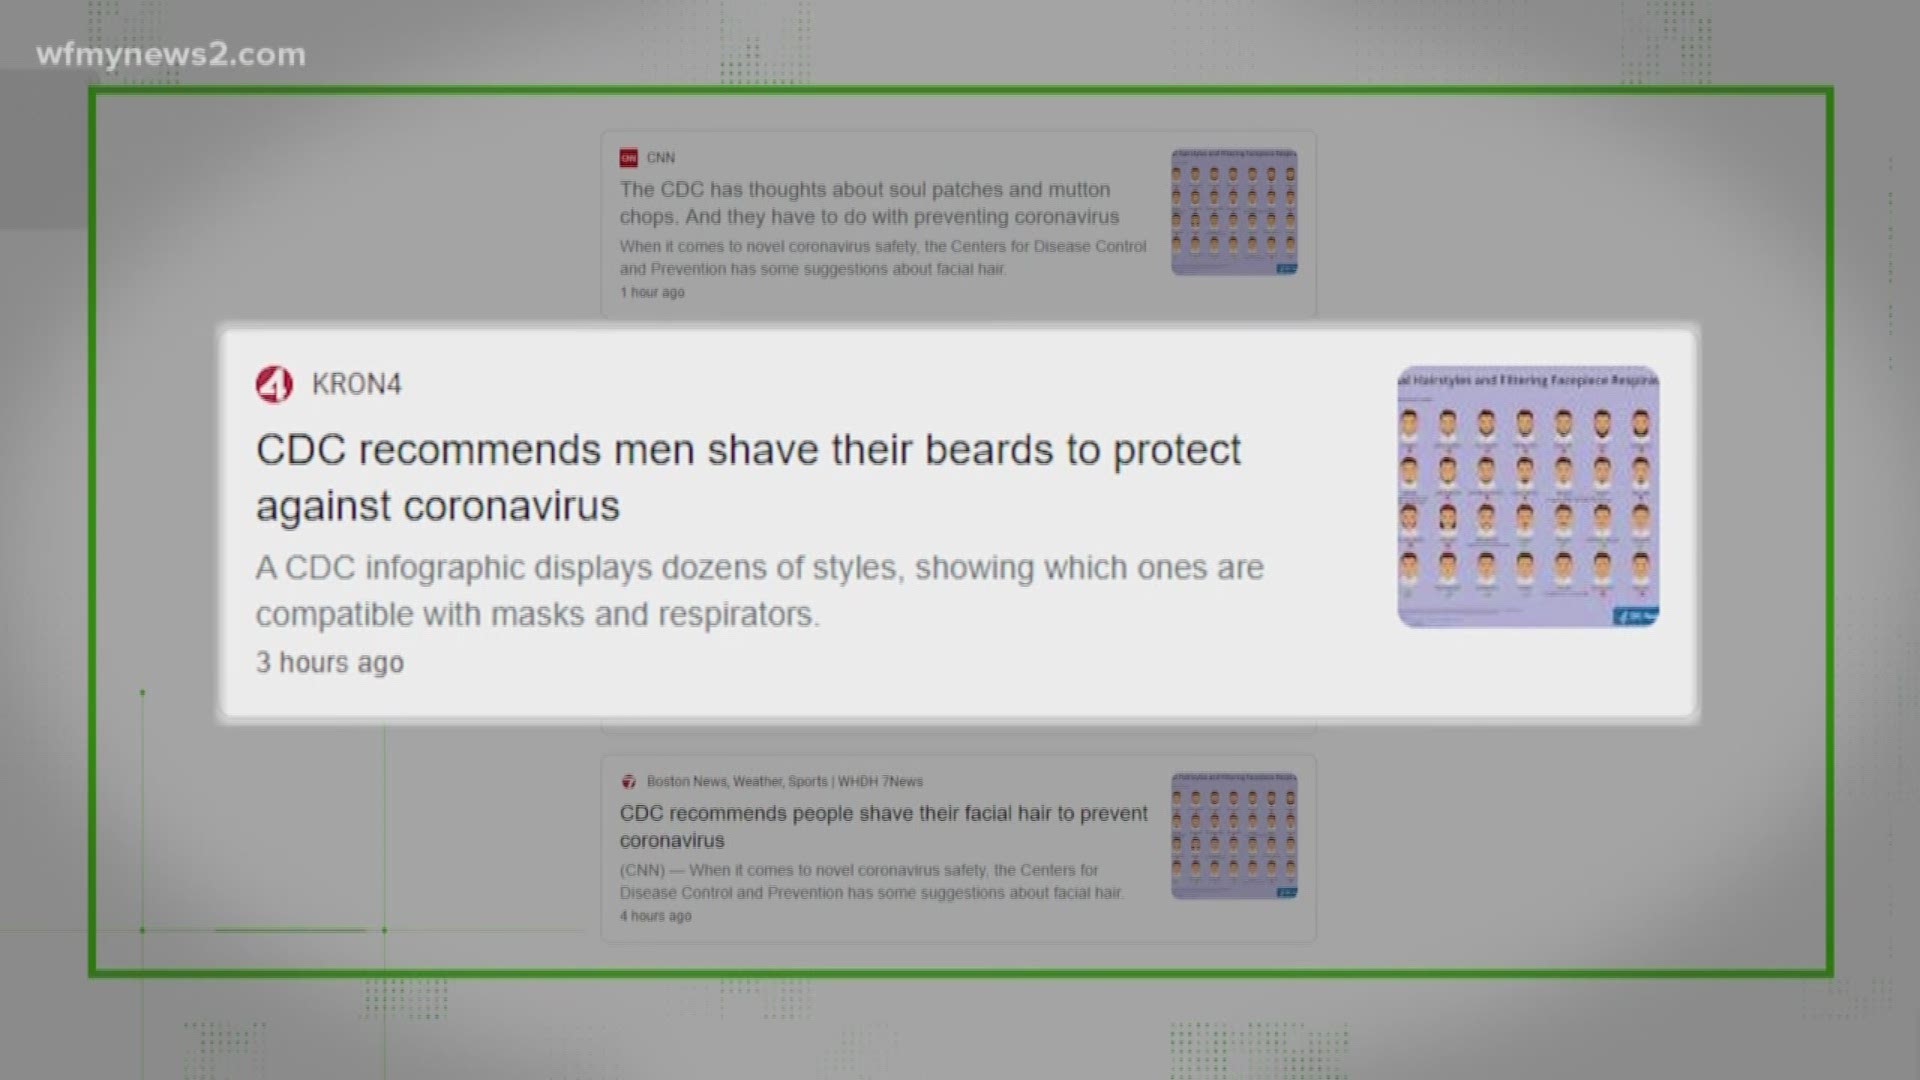 The infographic regarding facial hair and masks was posted in 2017. It’s unrelated to the current coronavirus outbreak.